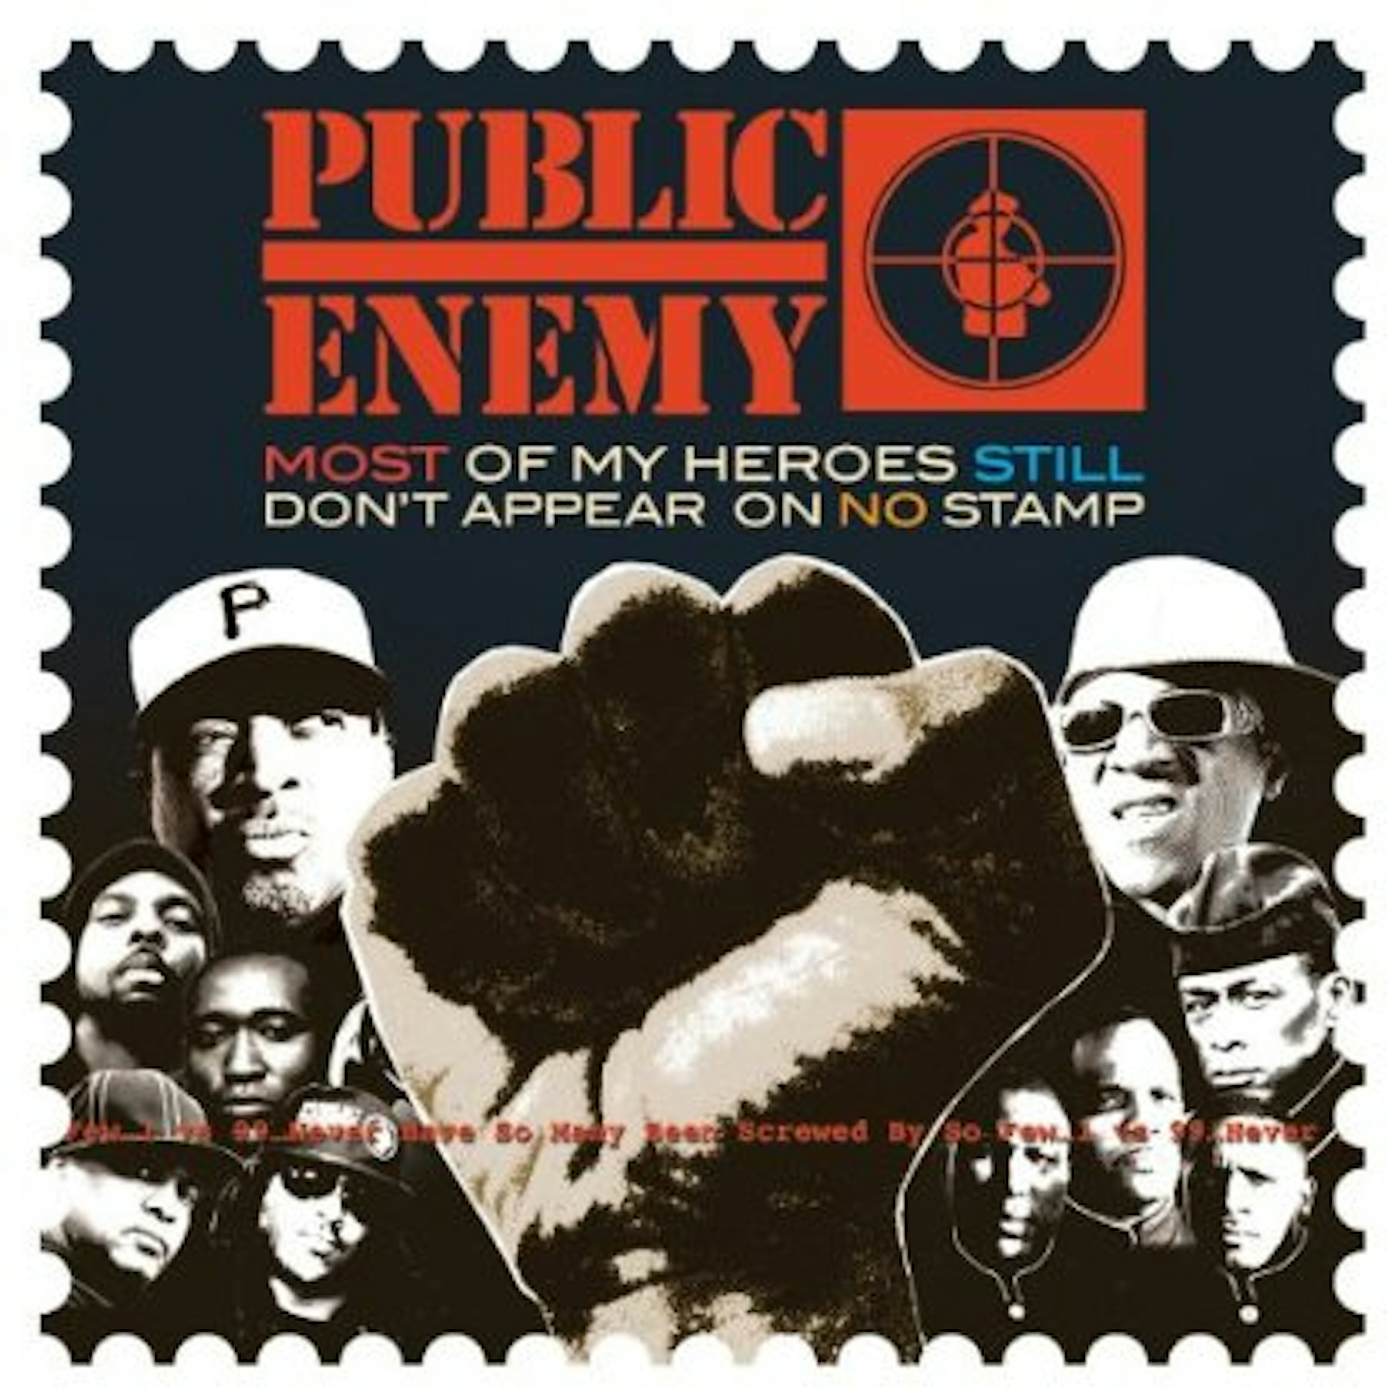 Public Enemy MOST OF MY HEROES STILL DON'T APPEAR ON NO STAMP CD